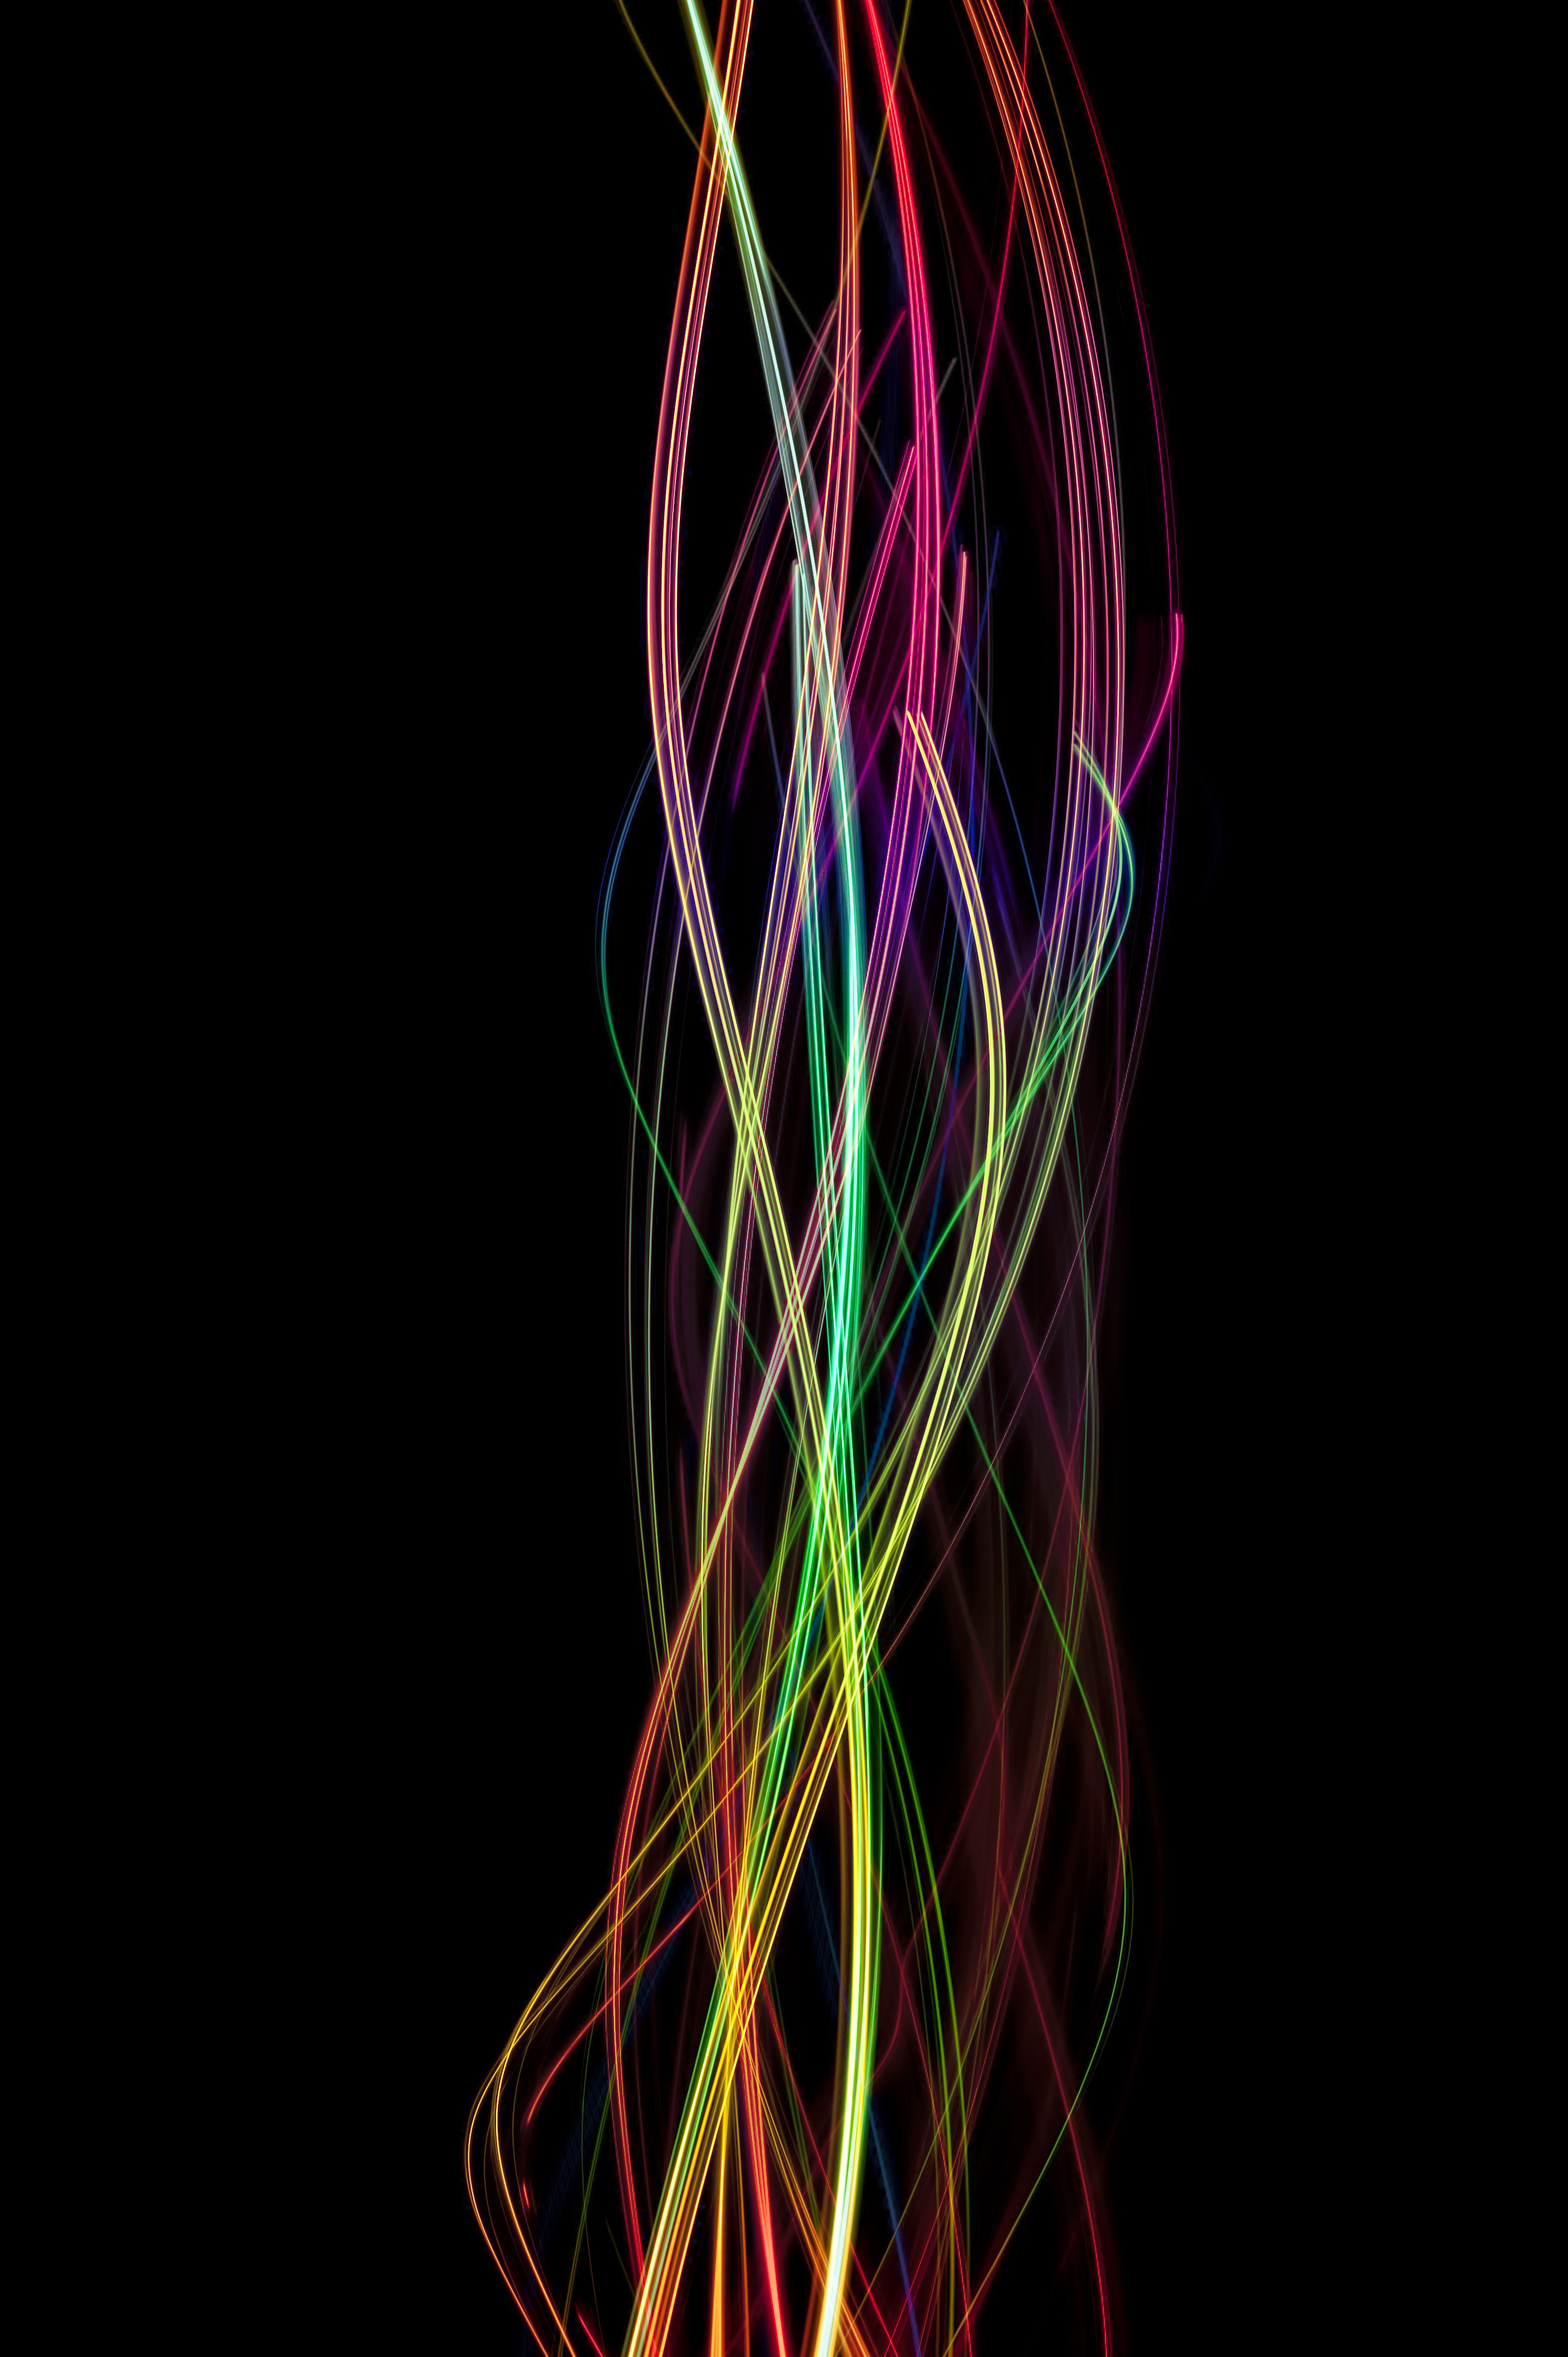 multicolored, involute, motley, abstract, lines, wavy, swirling